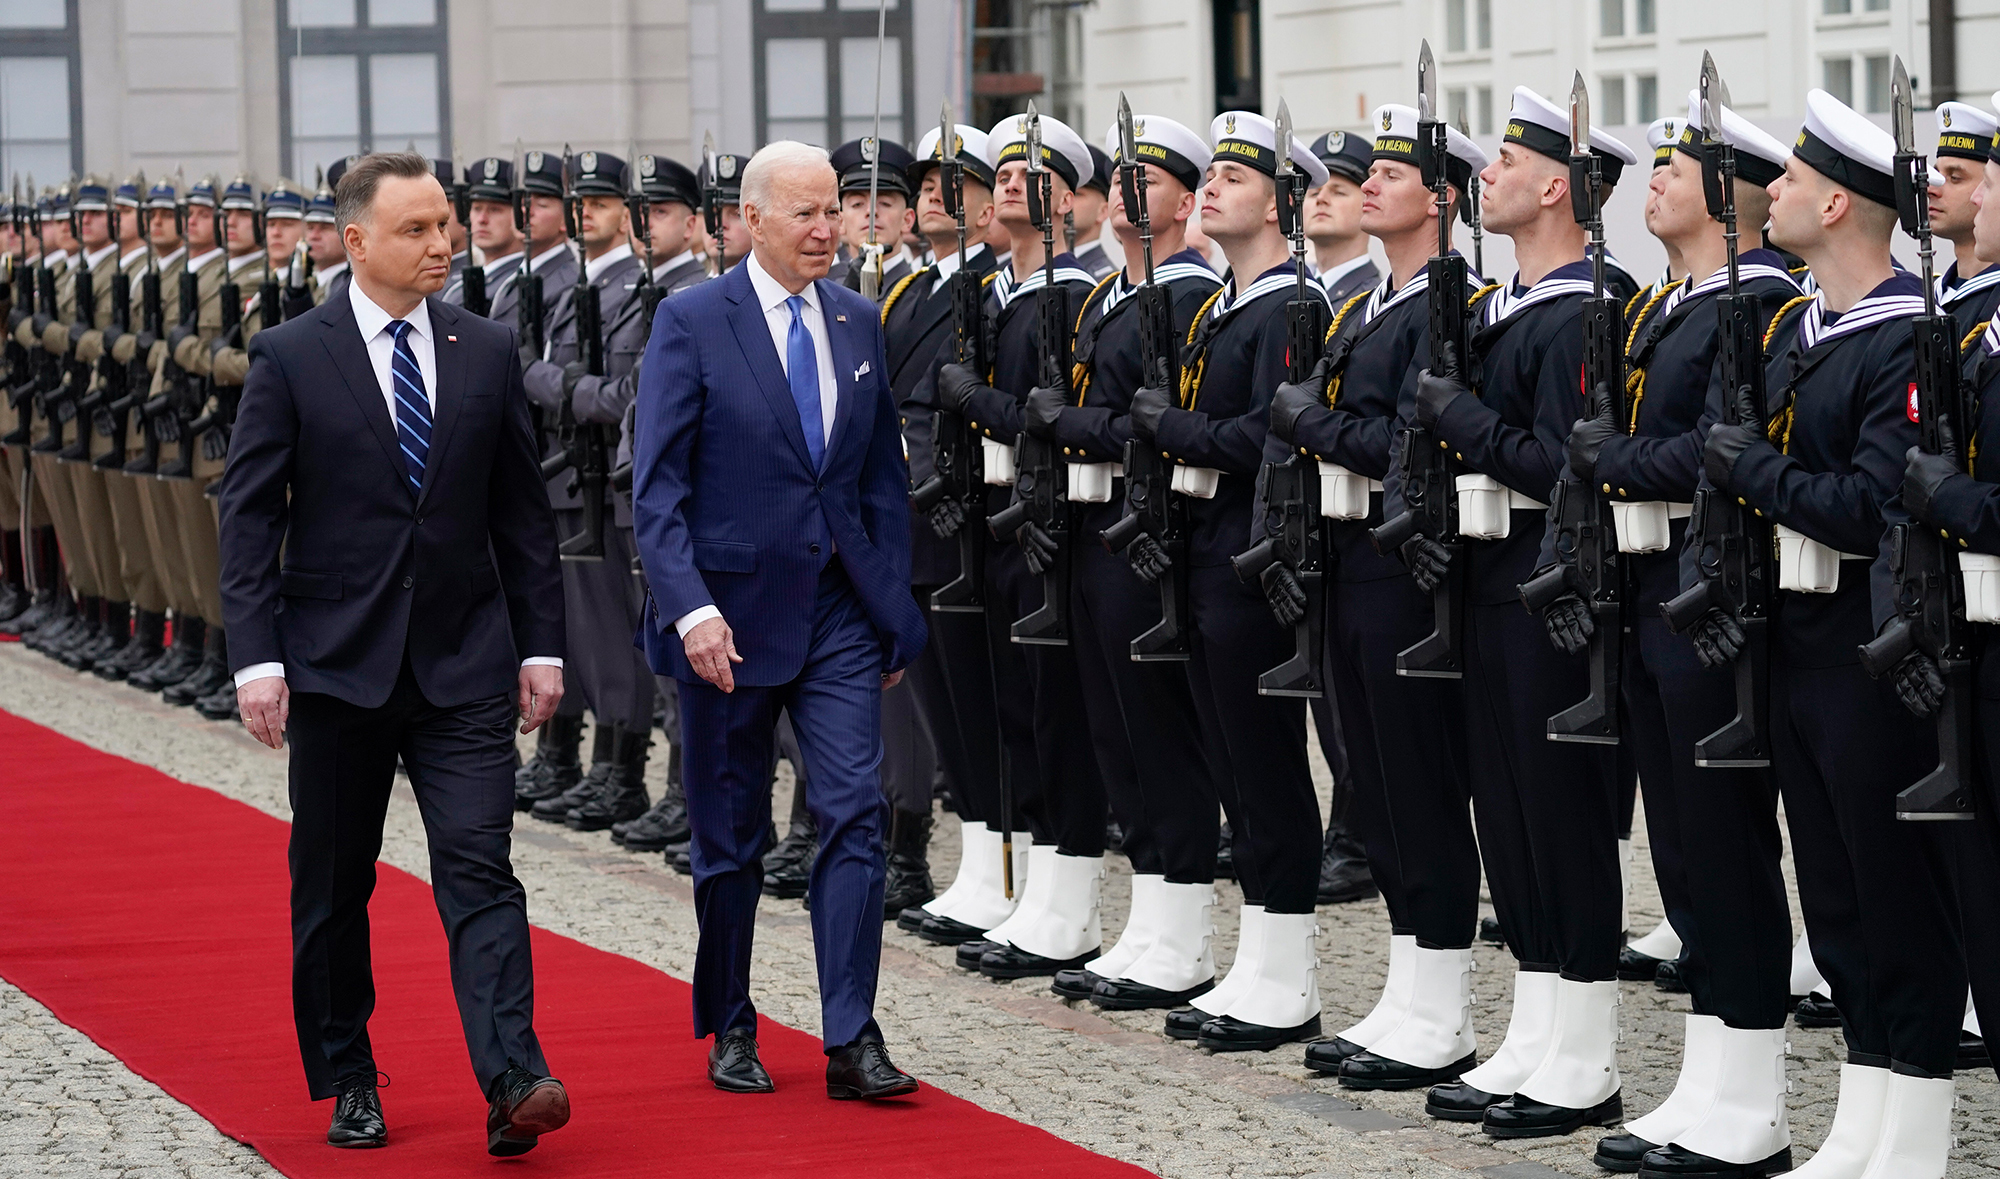 US President Joe Biden participates in an arrival ceremony with Polish President Andrzej Duda on March 26 in Warsaw, Poland. 